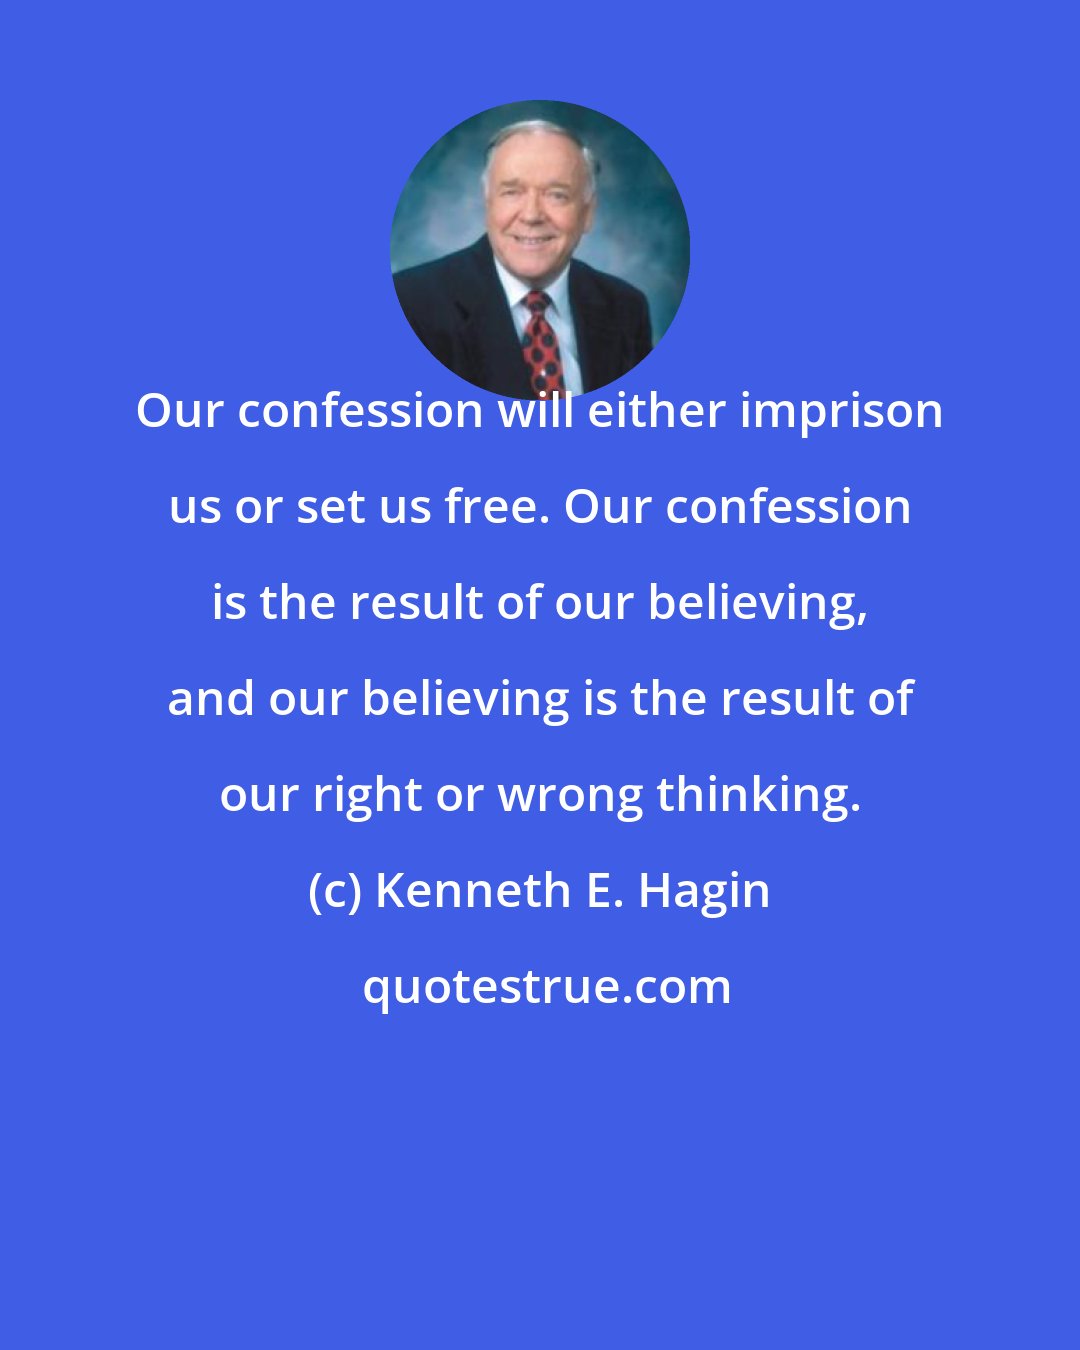 Kenneth E. Hagin: Our confession will either imprison us or set us free. Our confession is the result of our believing, and our believing is the result of our right or wrong thinking.